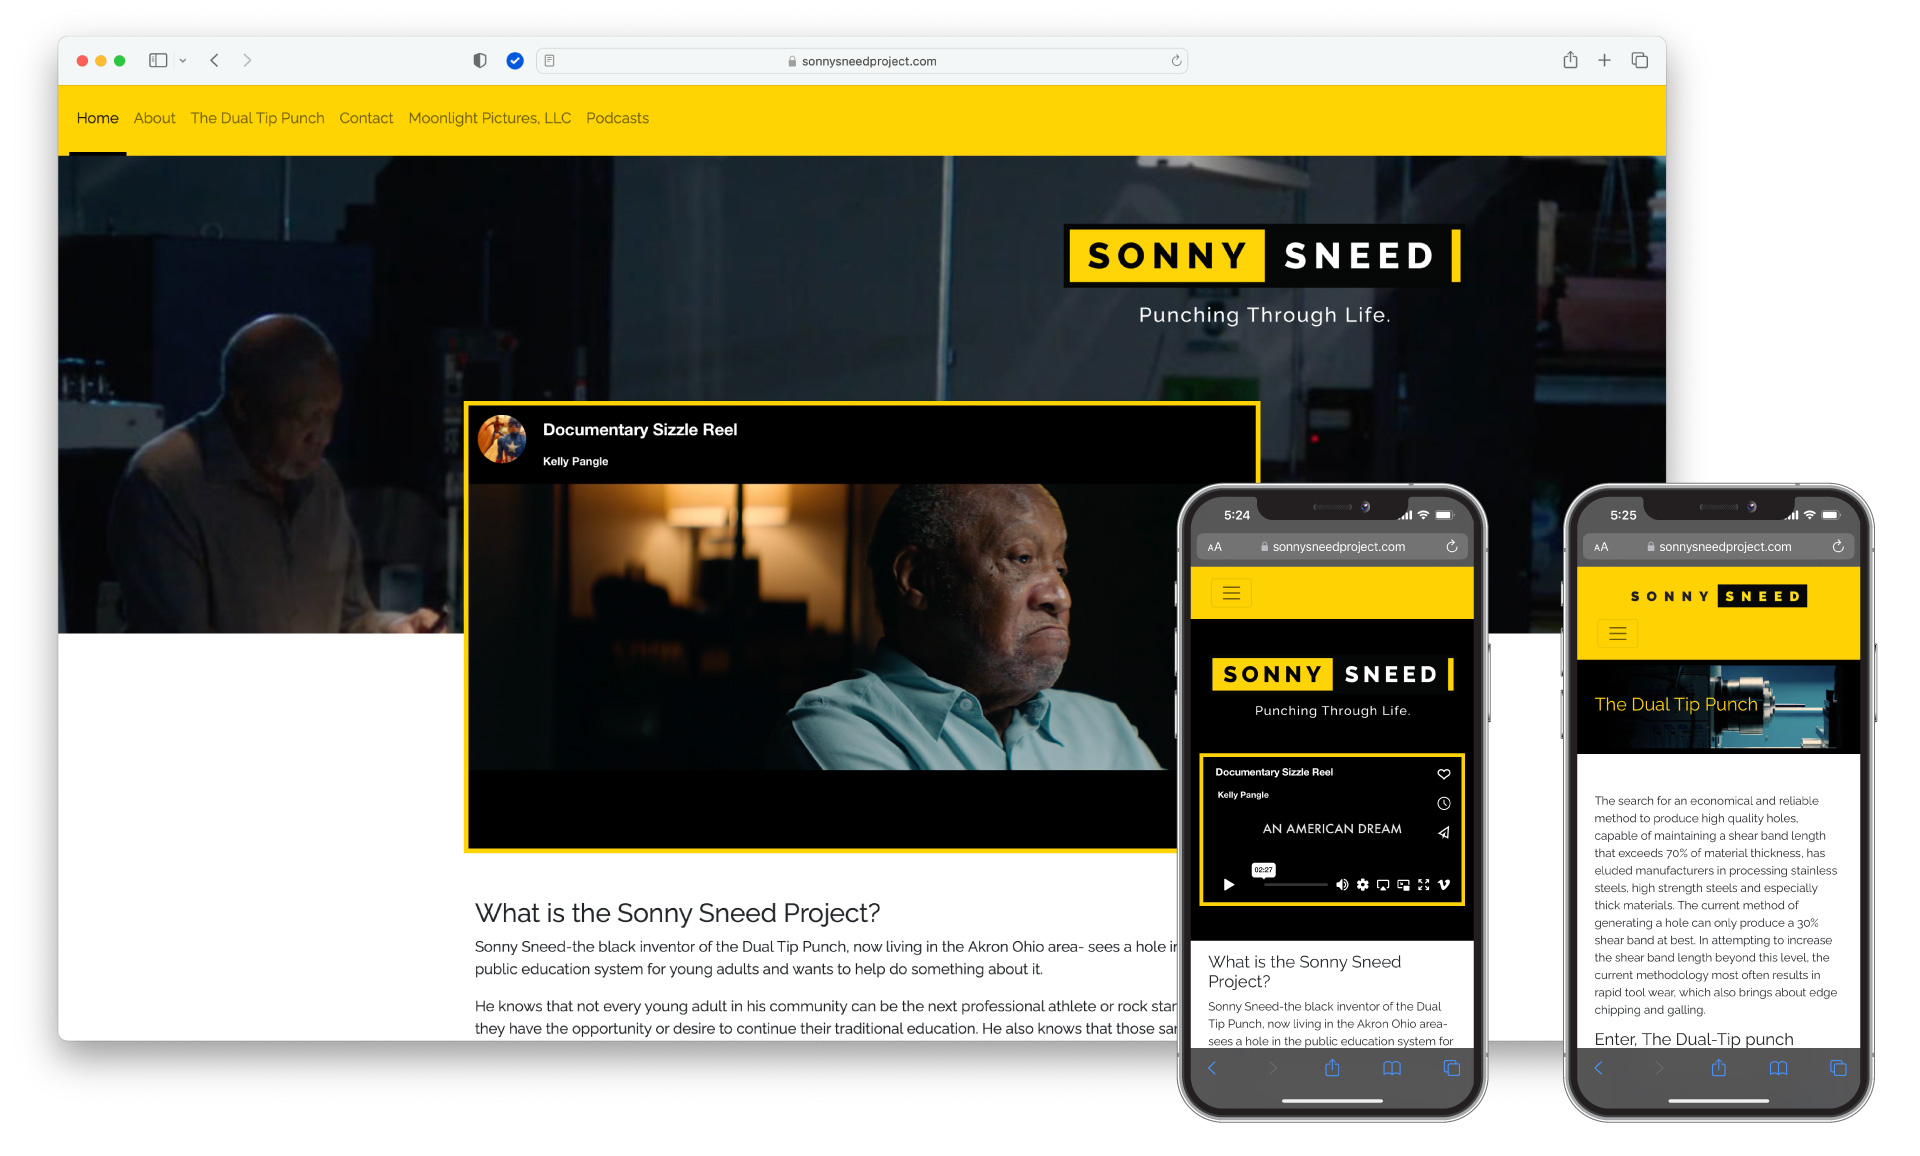 The Sonny Sneed Project Microsite